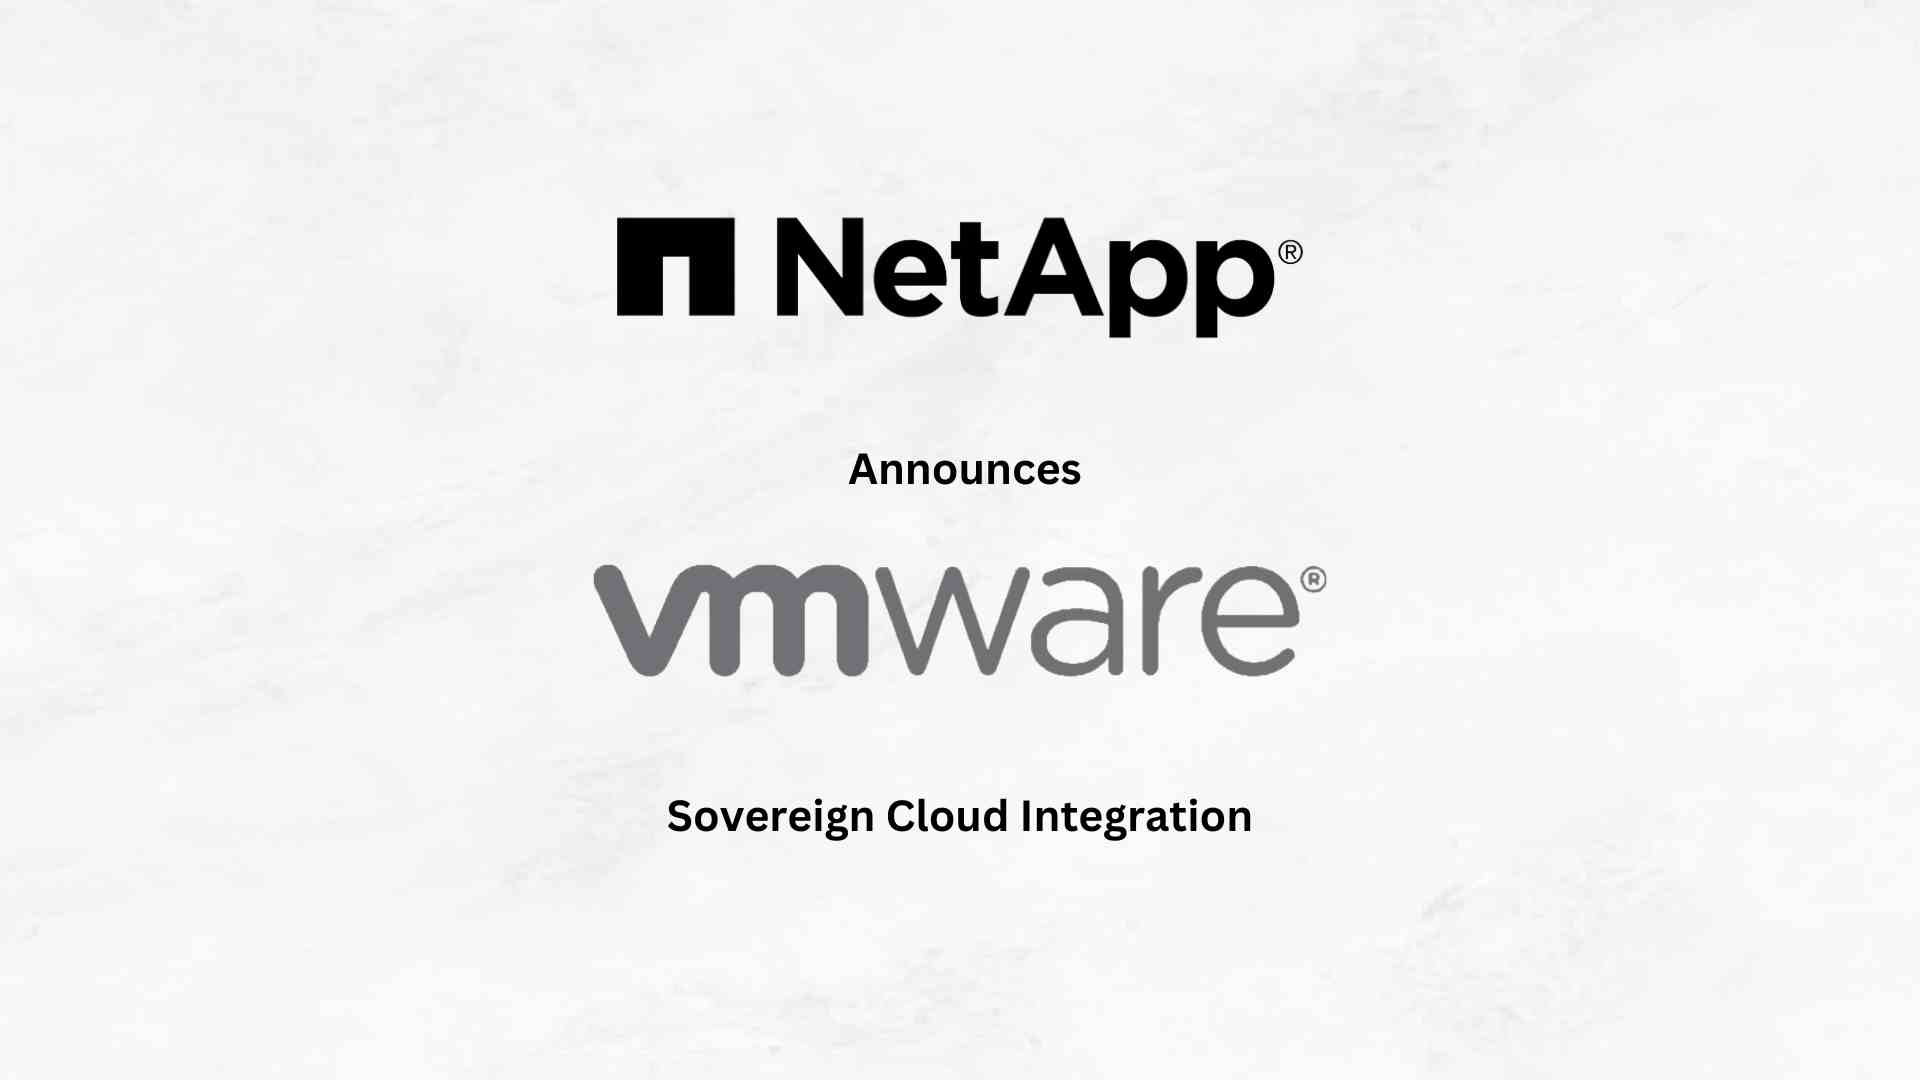 NetApp Announces VMware Sovereign Cloud Integration and Simplified Data Management Solutions for Modern Virtualized Applications